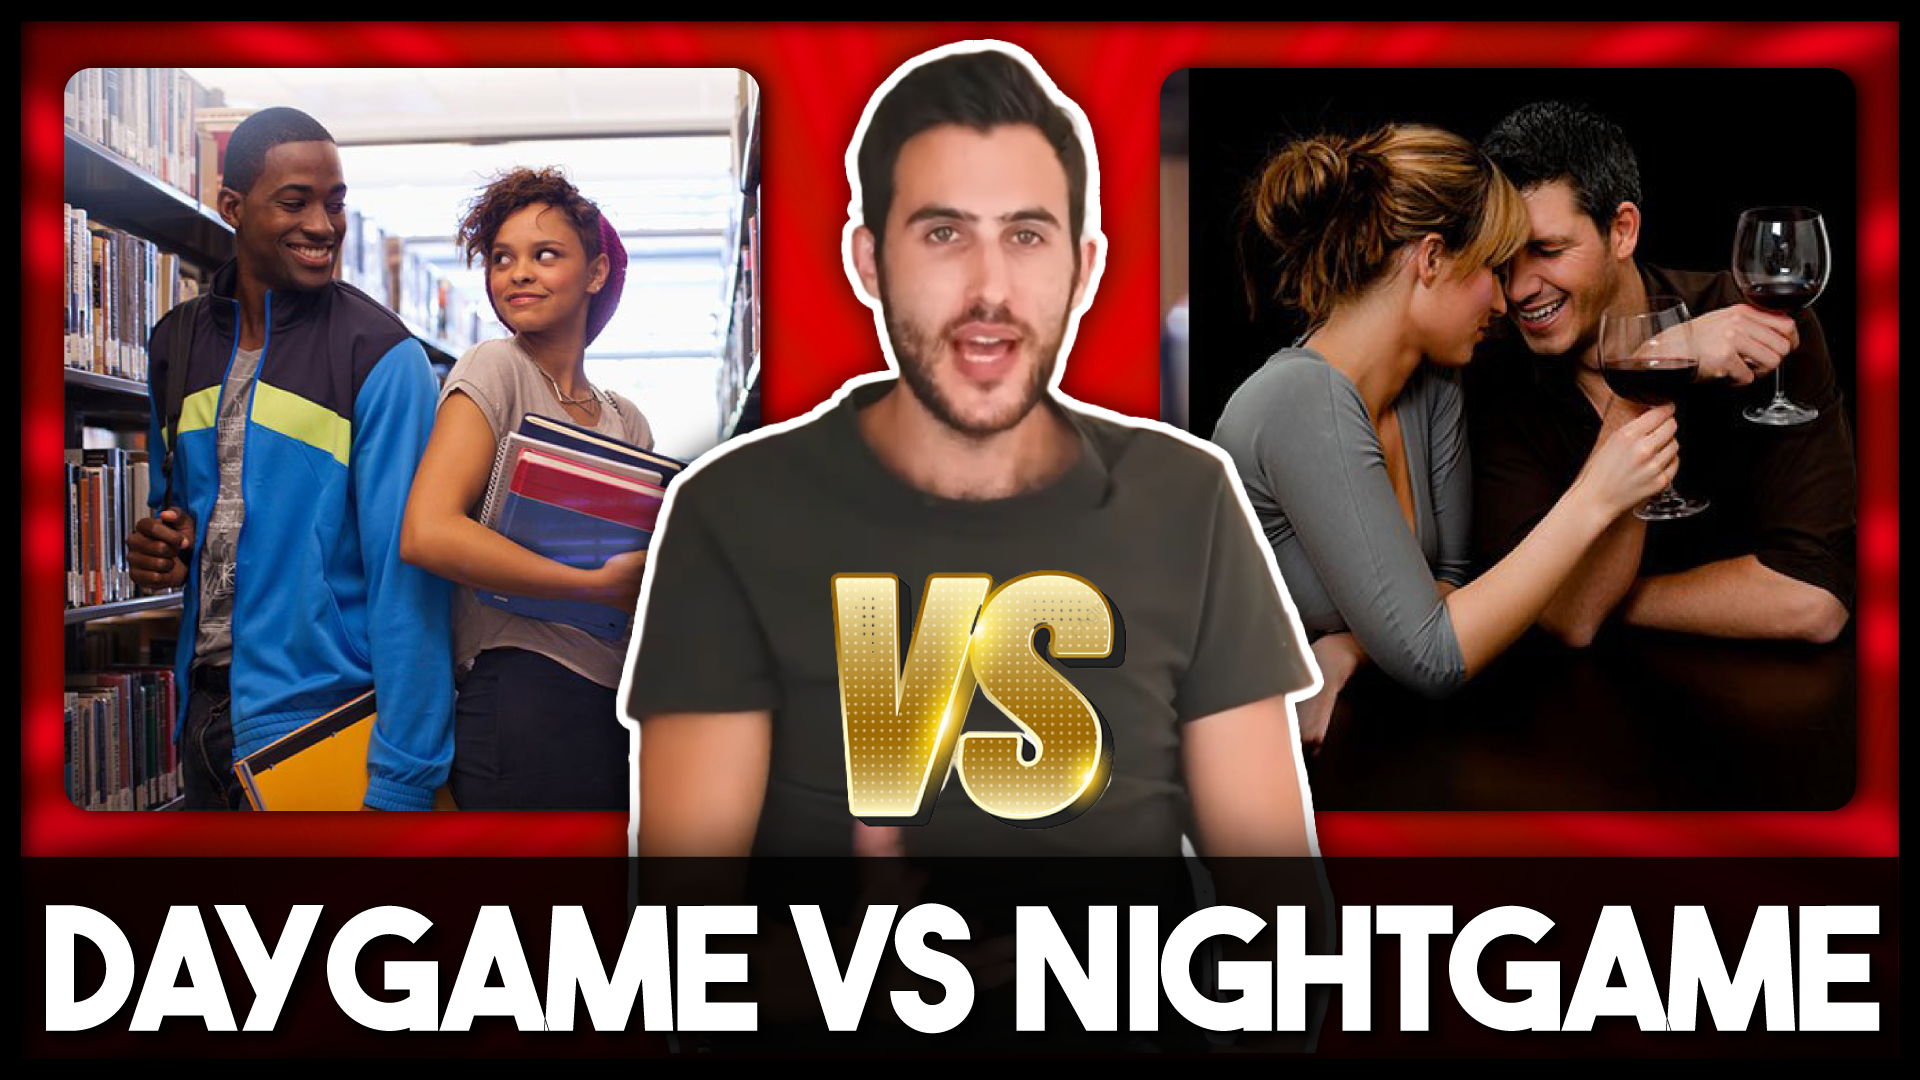 Daygame VS Nightgame & (HOW THEY DIFFER)